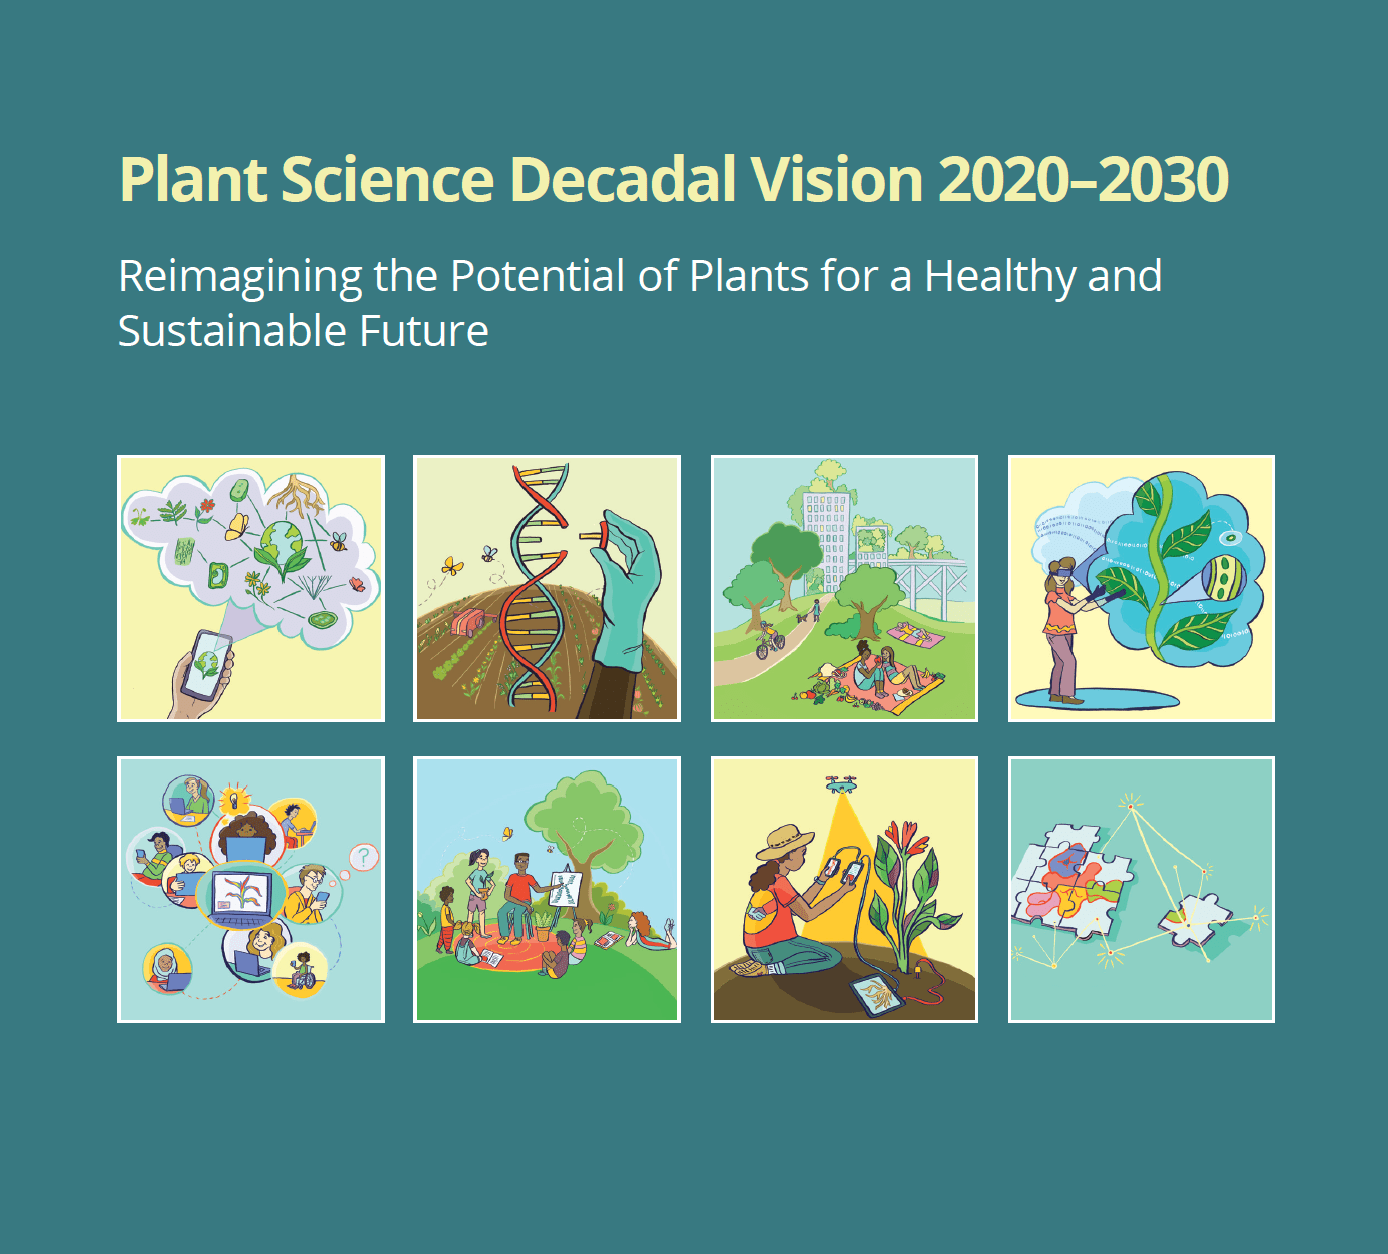 Plant Science Decadal Vision 20-30